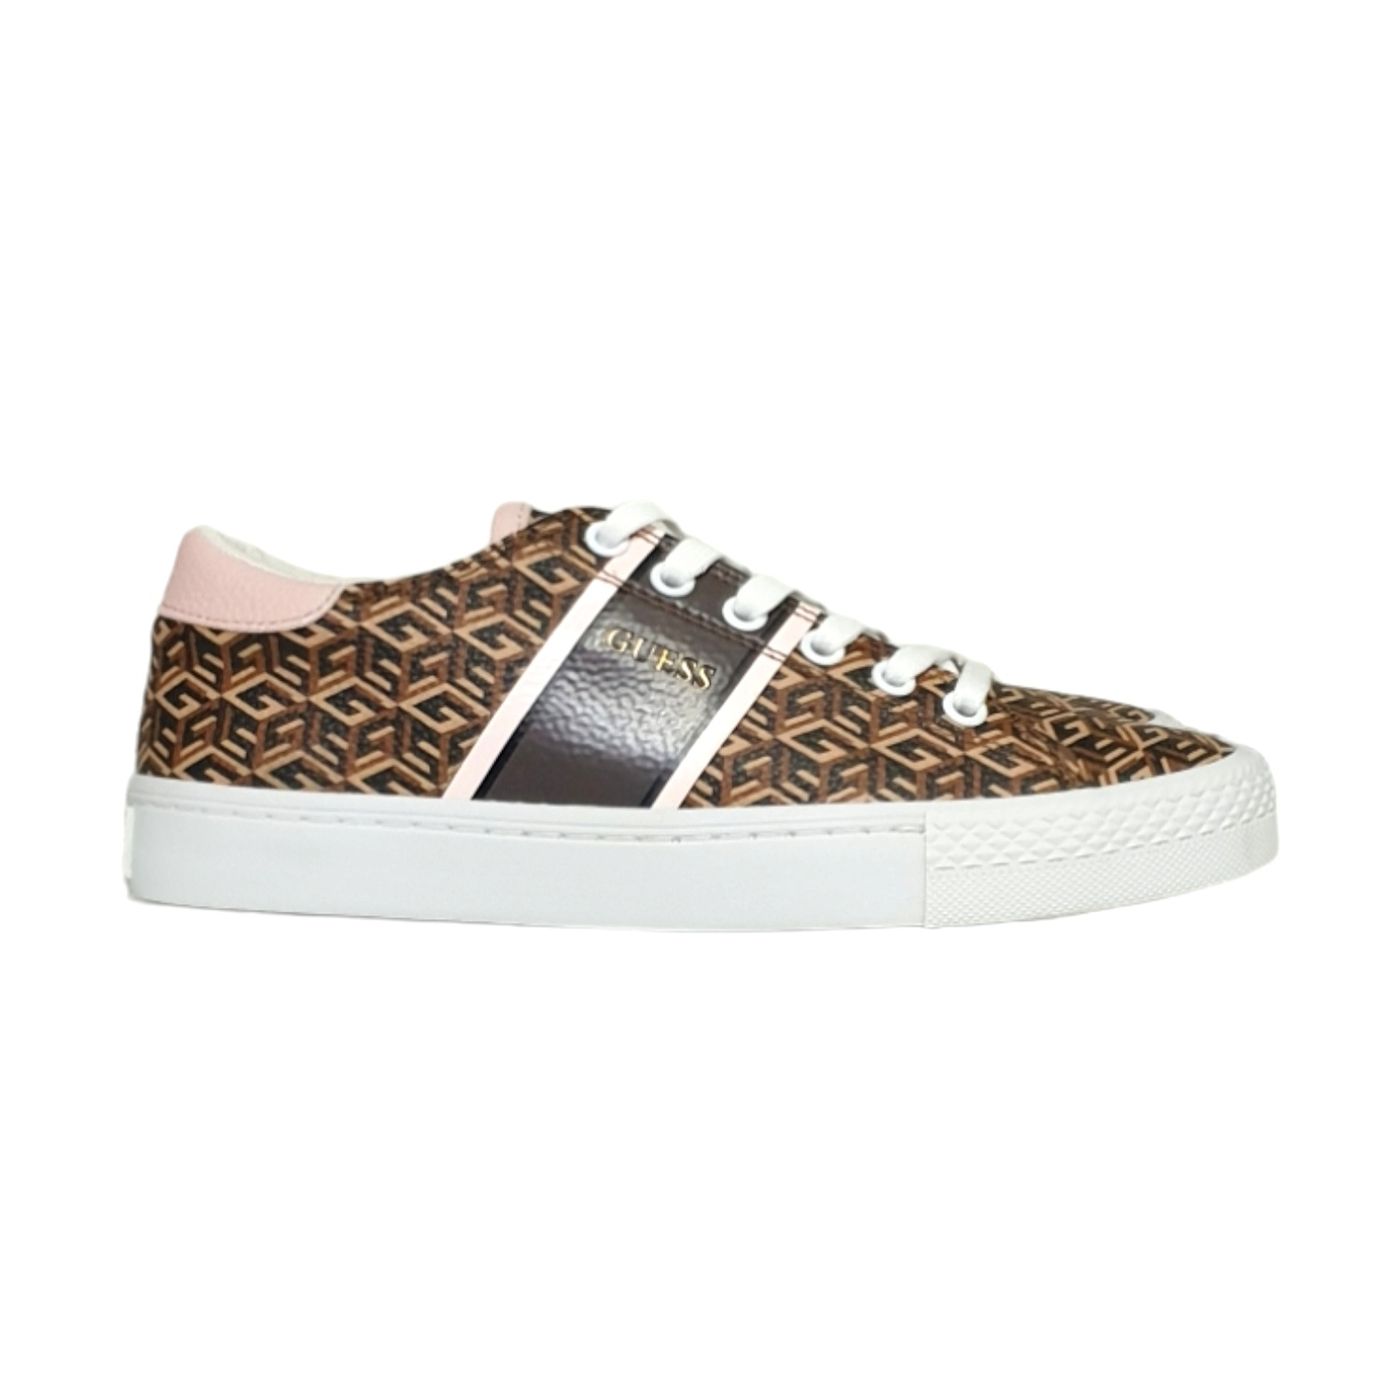 SNEAKERS GUESS DONNA CON LOGO STAMPATO Guess walkingon